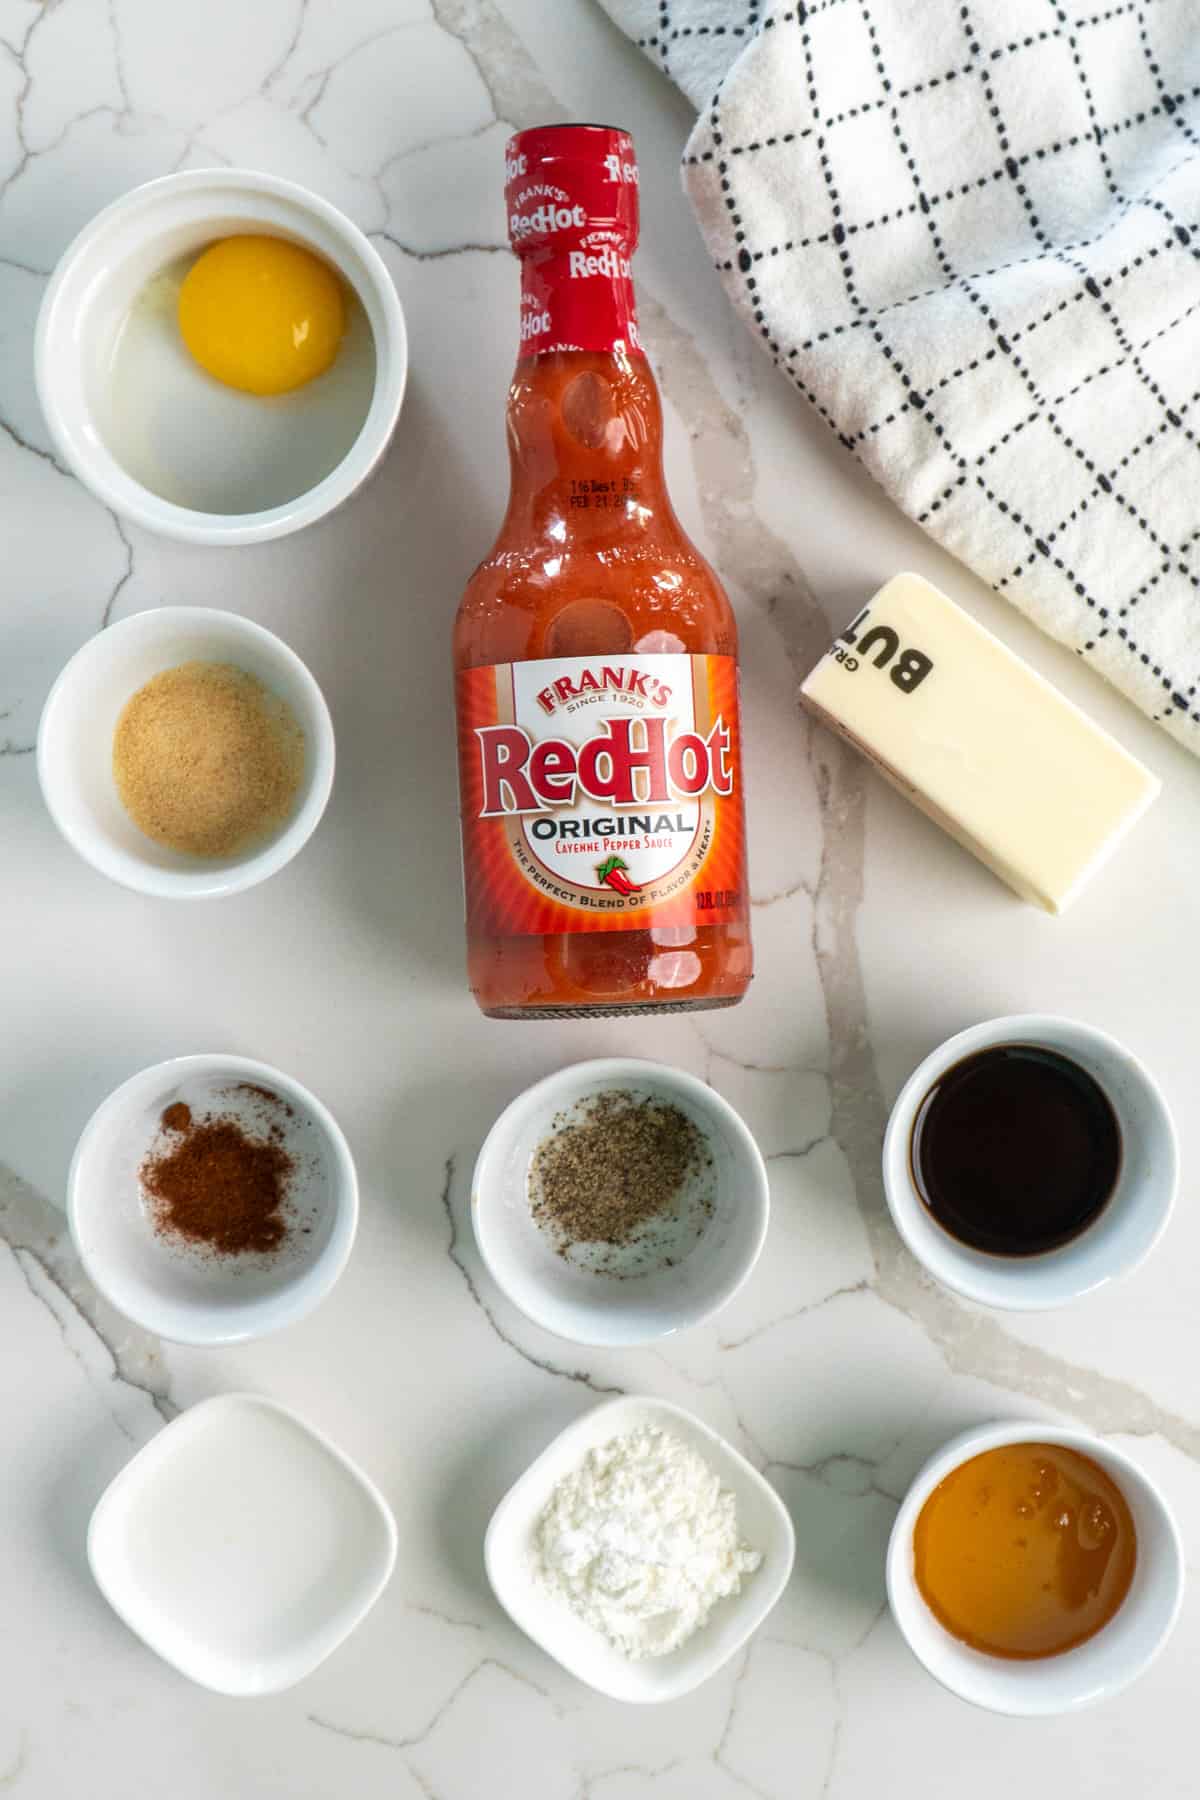 All the indgredients need to make homemade buffalo sauce.